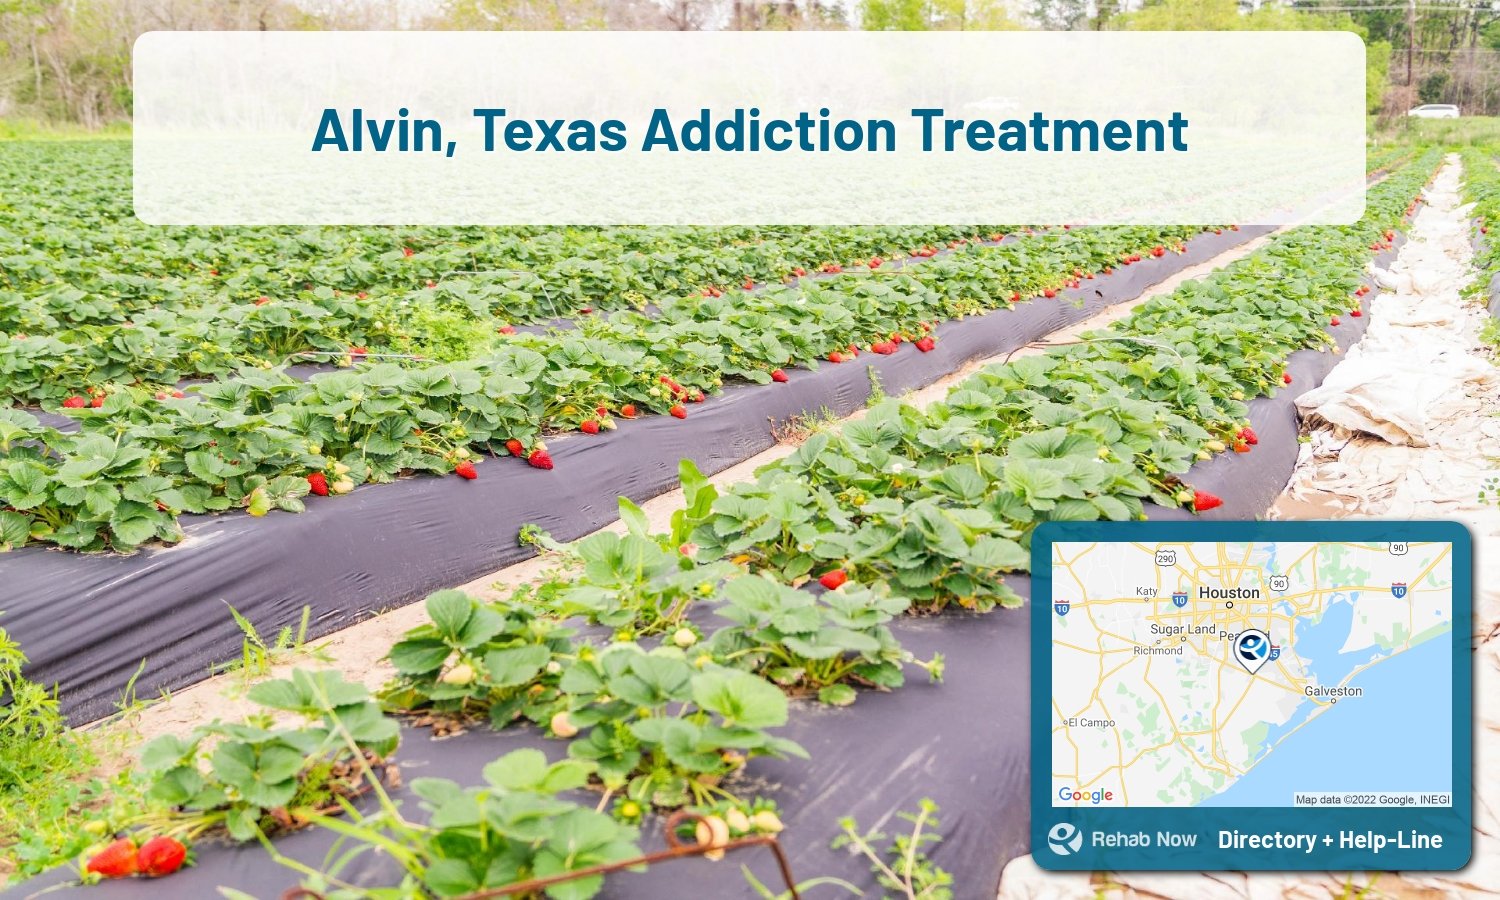 Drug rehab and alcohol treatment services nearby Alvin, TX. Need help choosing a treatment program? Call our free hotline!